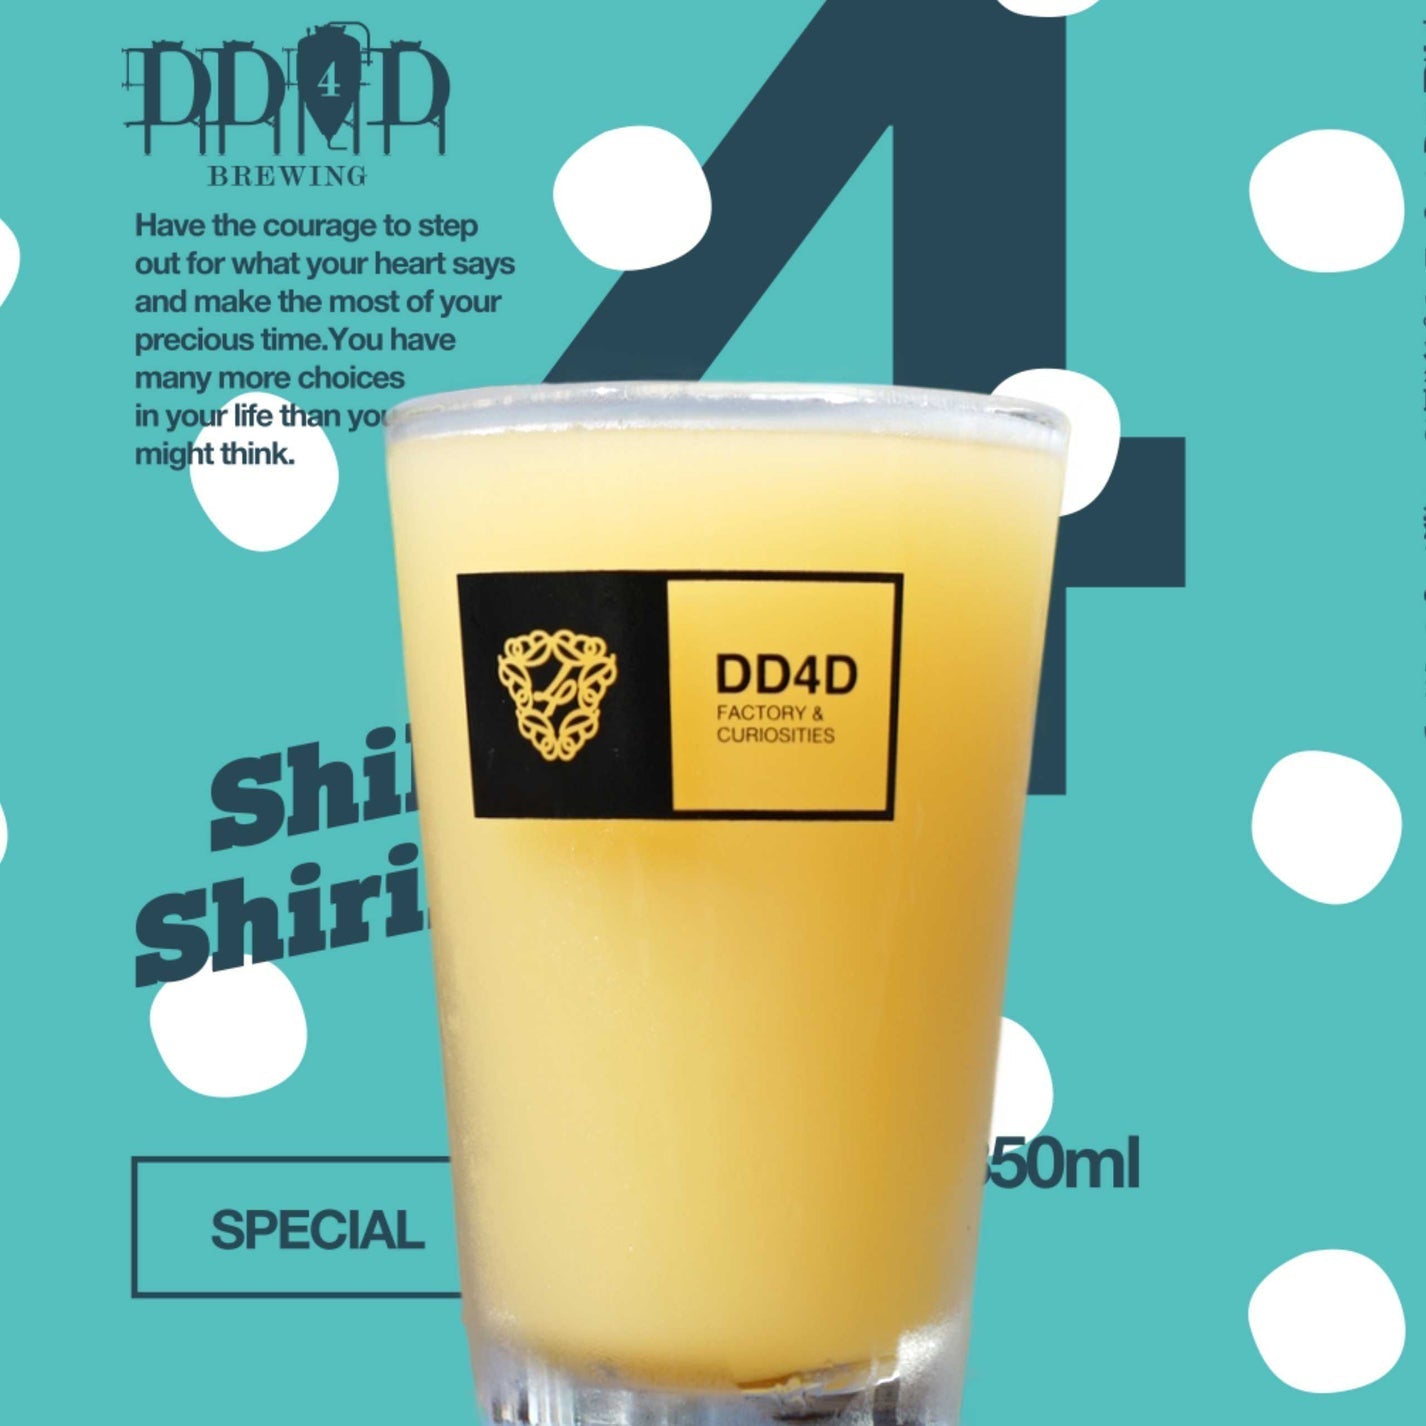 NORTH ISLAND BEER × DD4D BREWING collaboration beer set